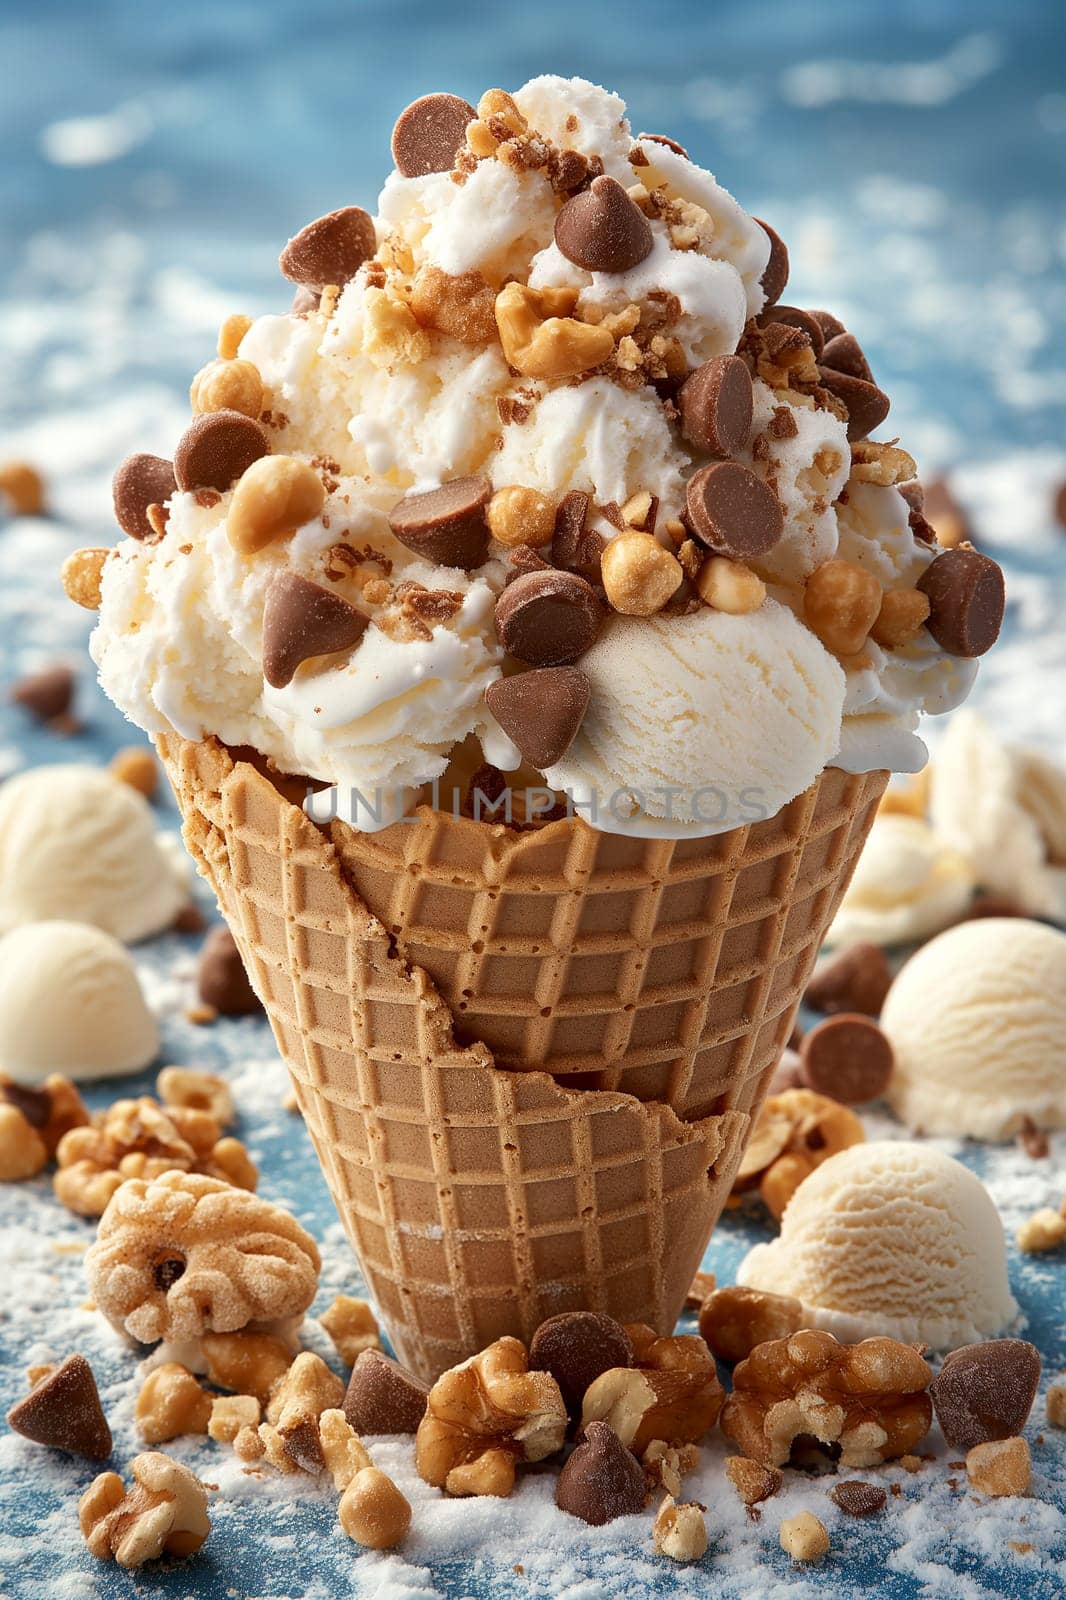 Creamy ice cream cone topped with nuts and chocolate chips. by Hype2art